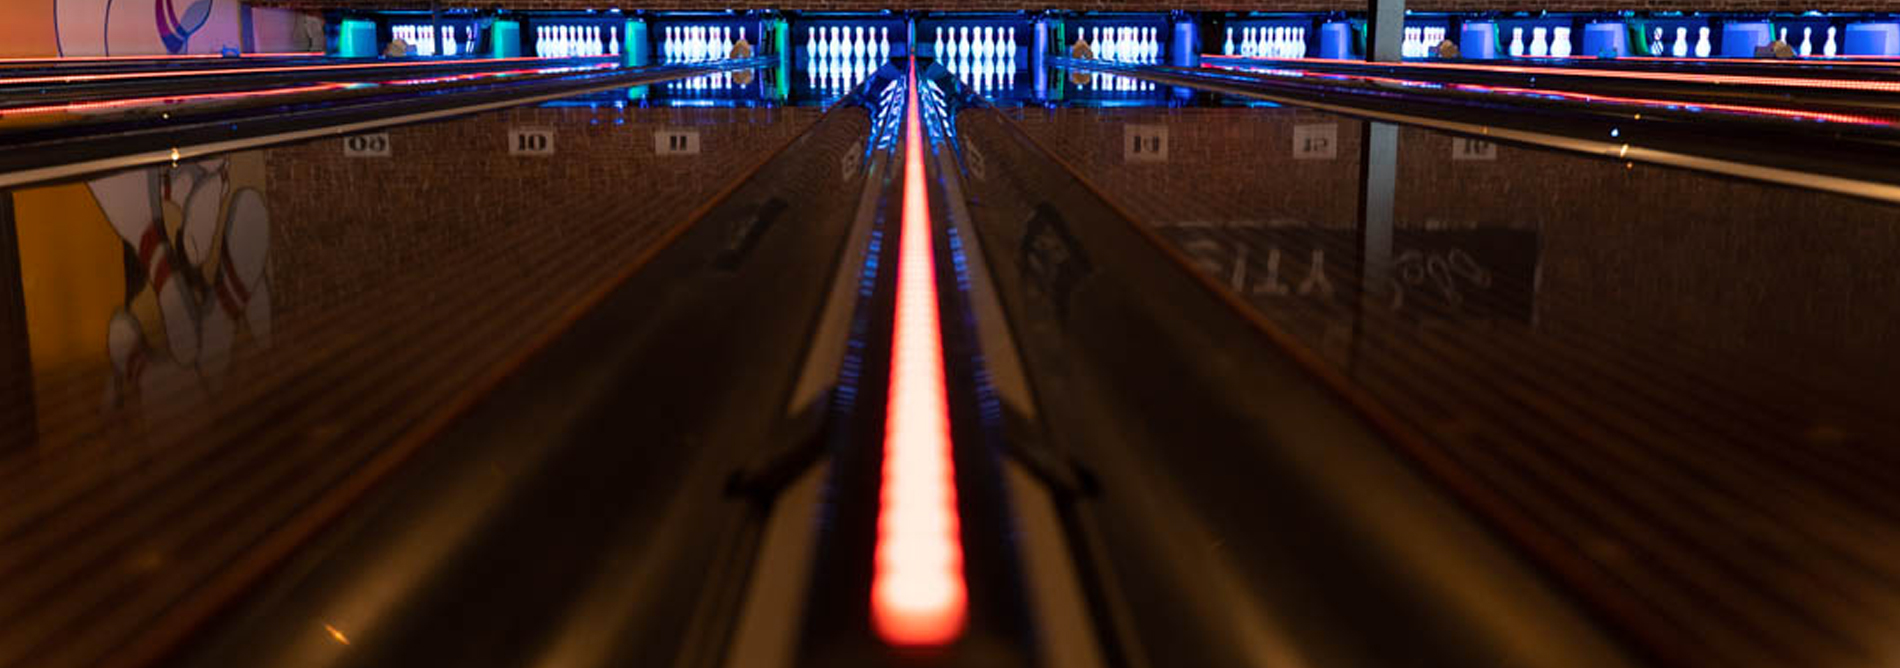 Bowling-QubicaAMF-capping-light-2019-banner.jpg